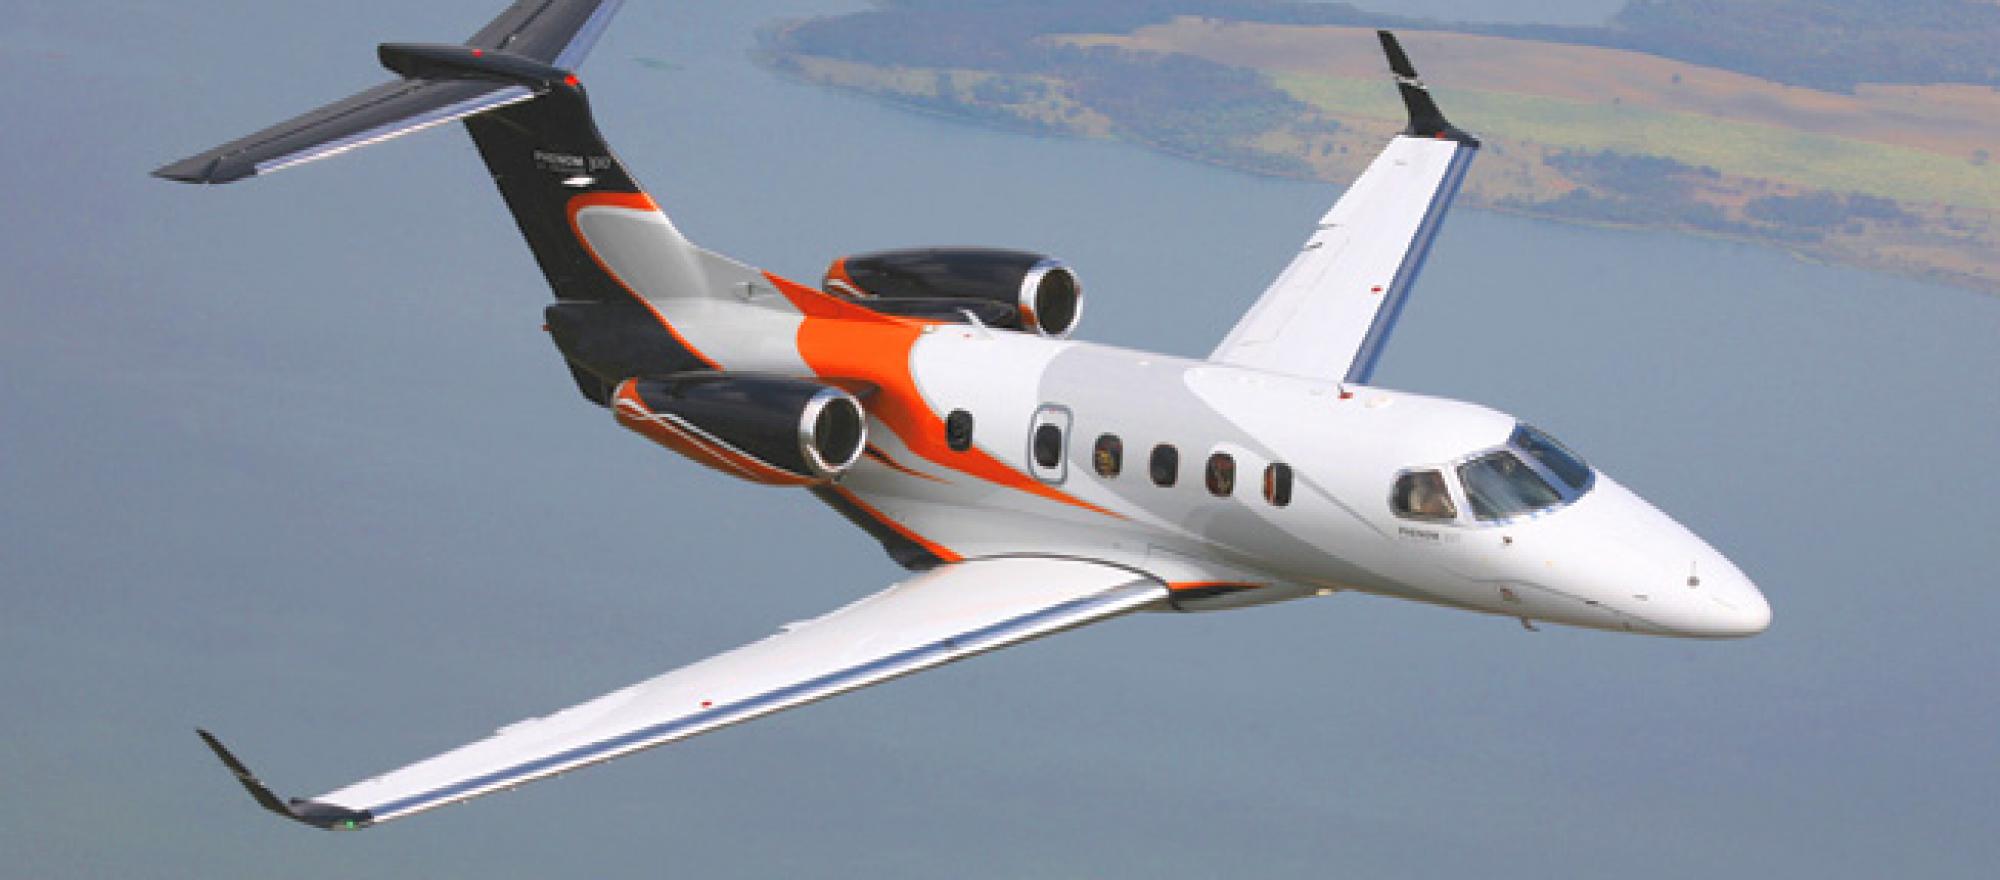 The only private aviation option that defies comparison to real estate is the